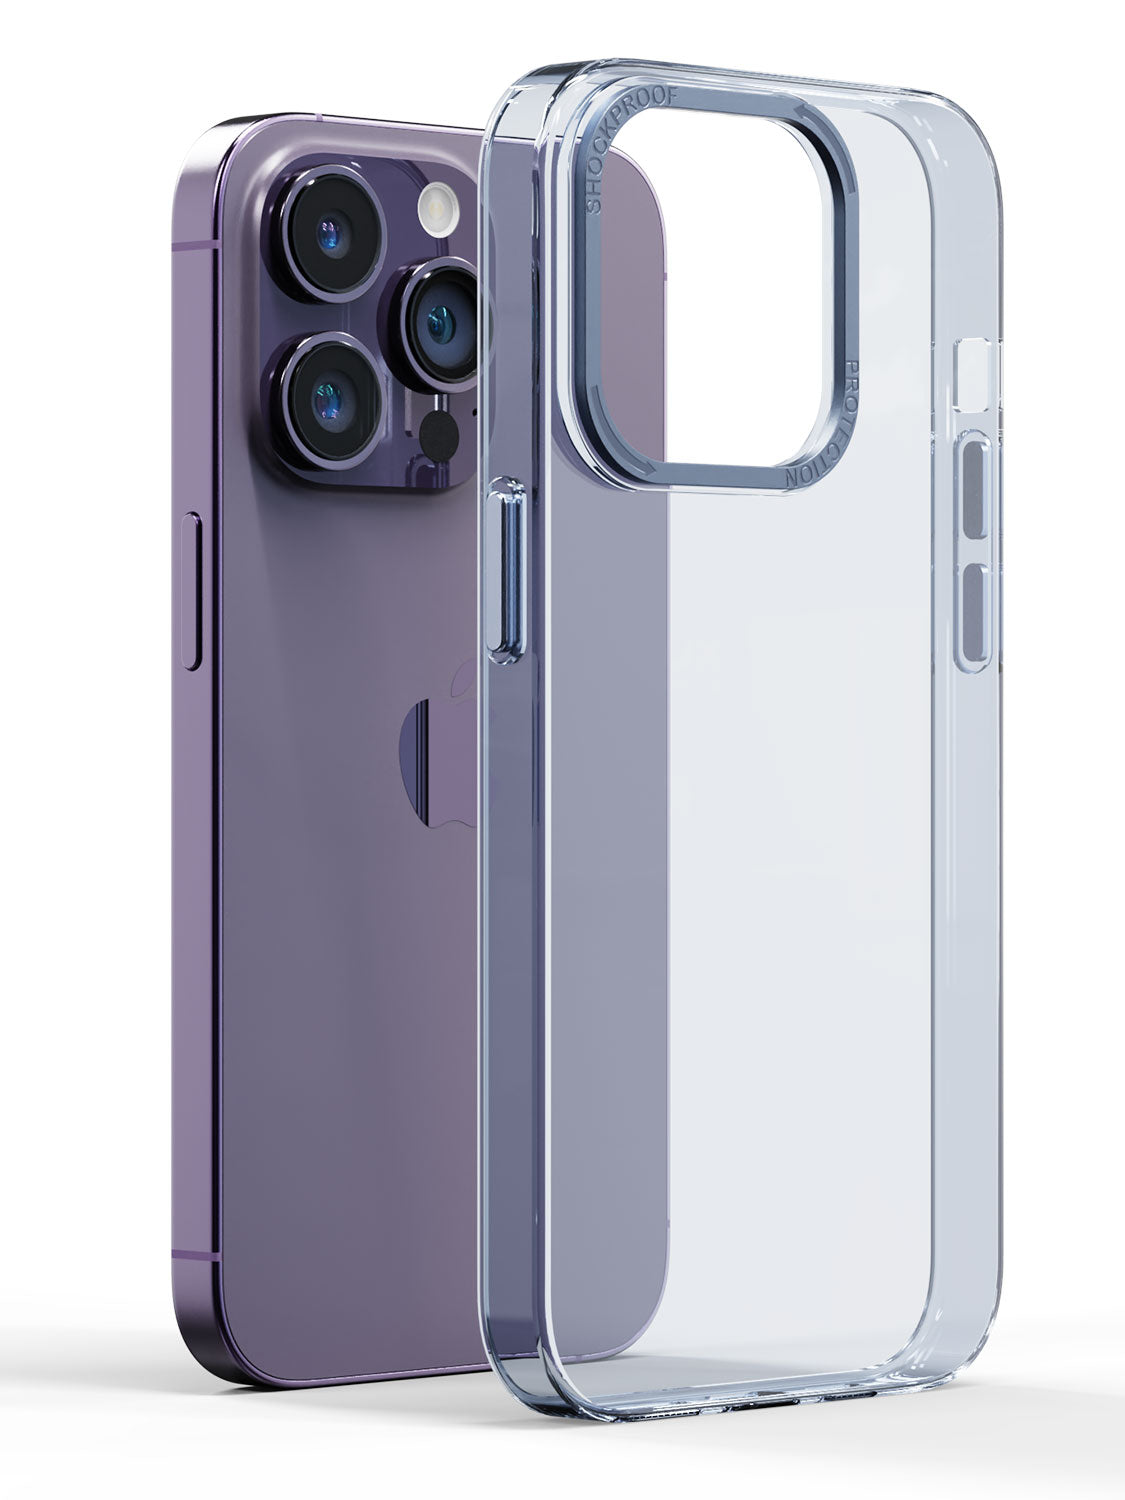 iphone 14 pro case with camera protection , iphone 14 pro cover with camera protection , iphone 14 pro case cover with camera protection , iphone 14 pro back cover with camera protection